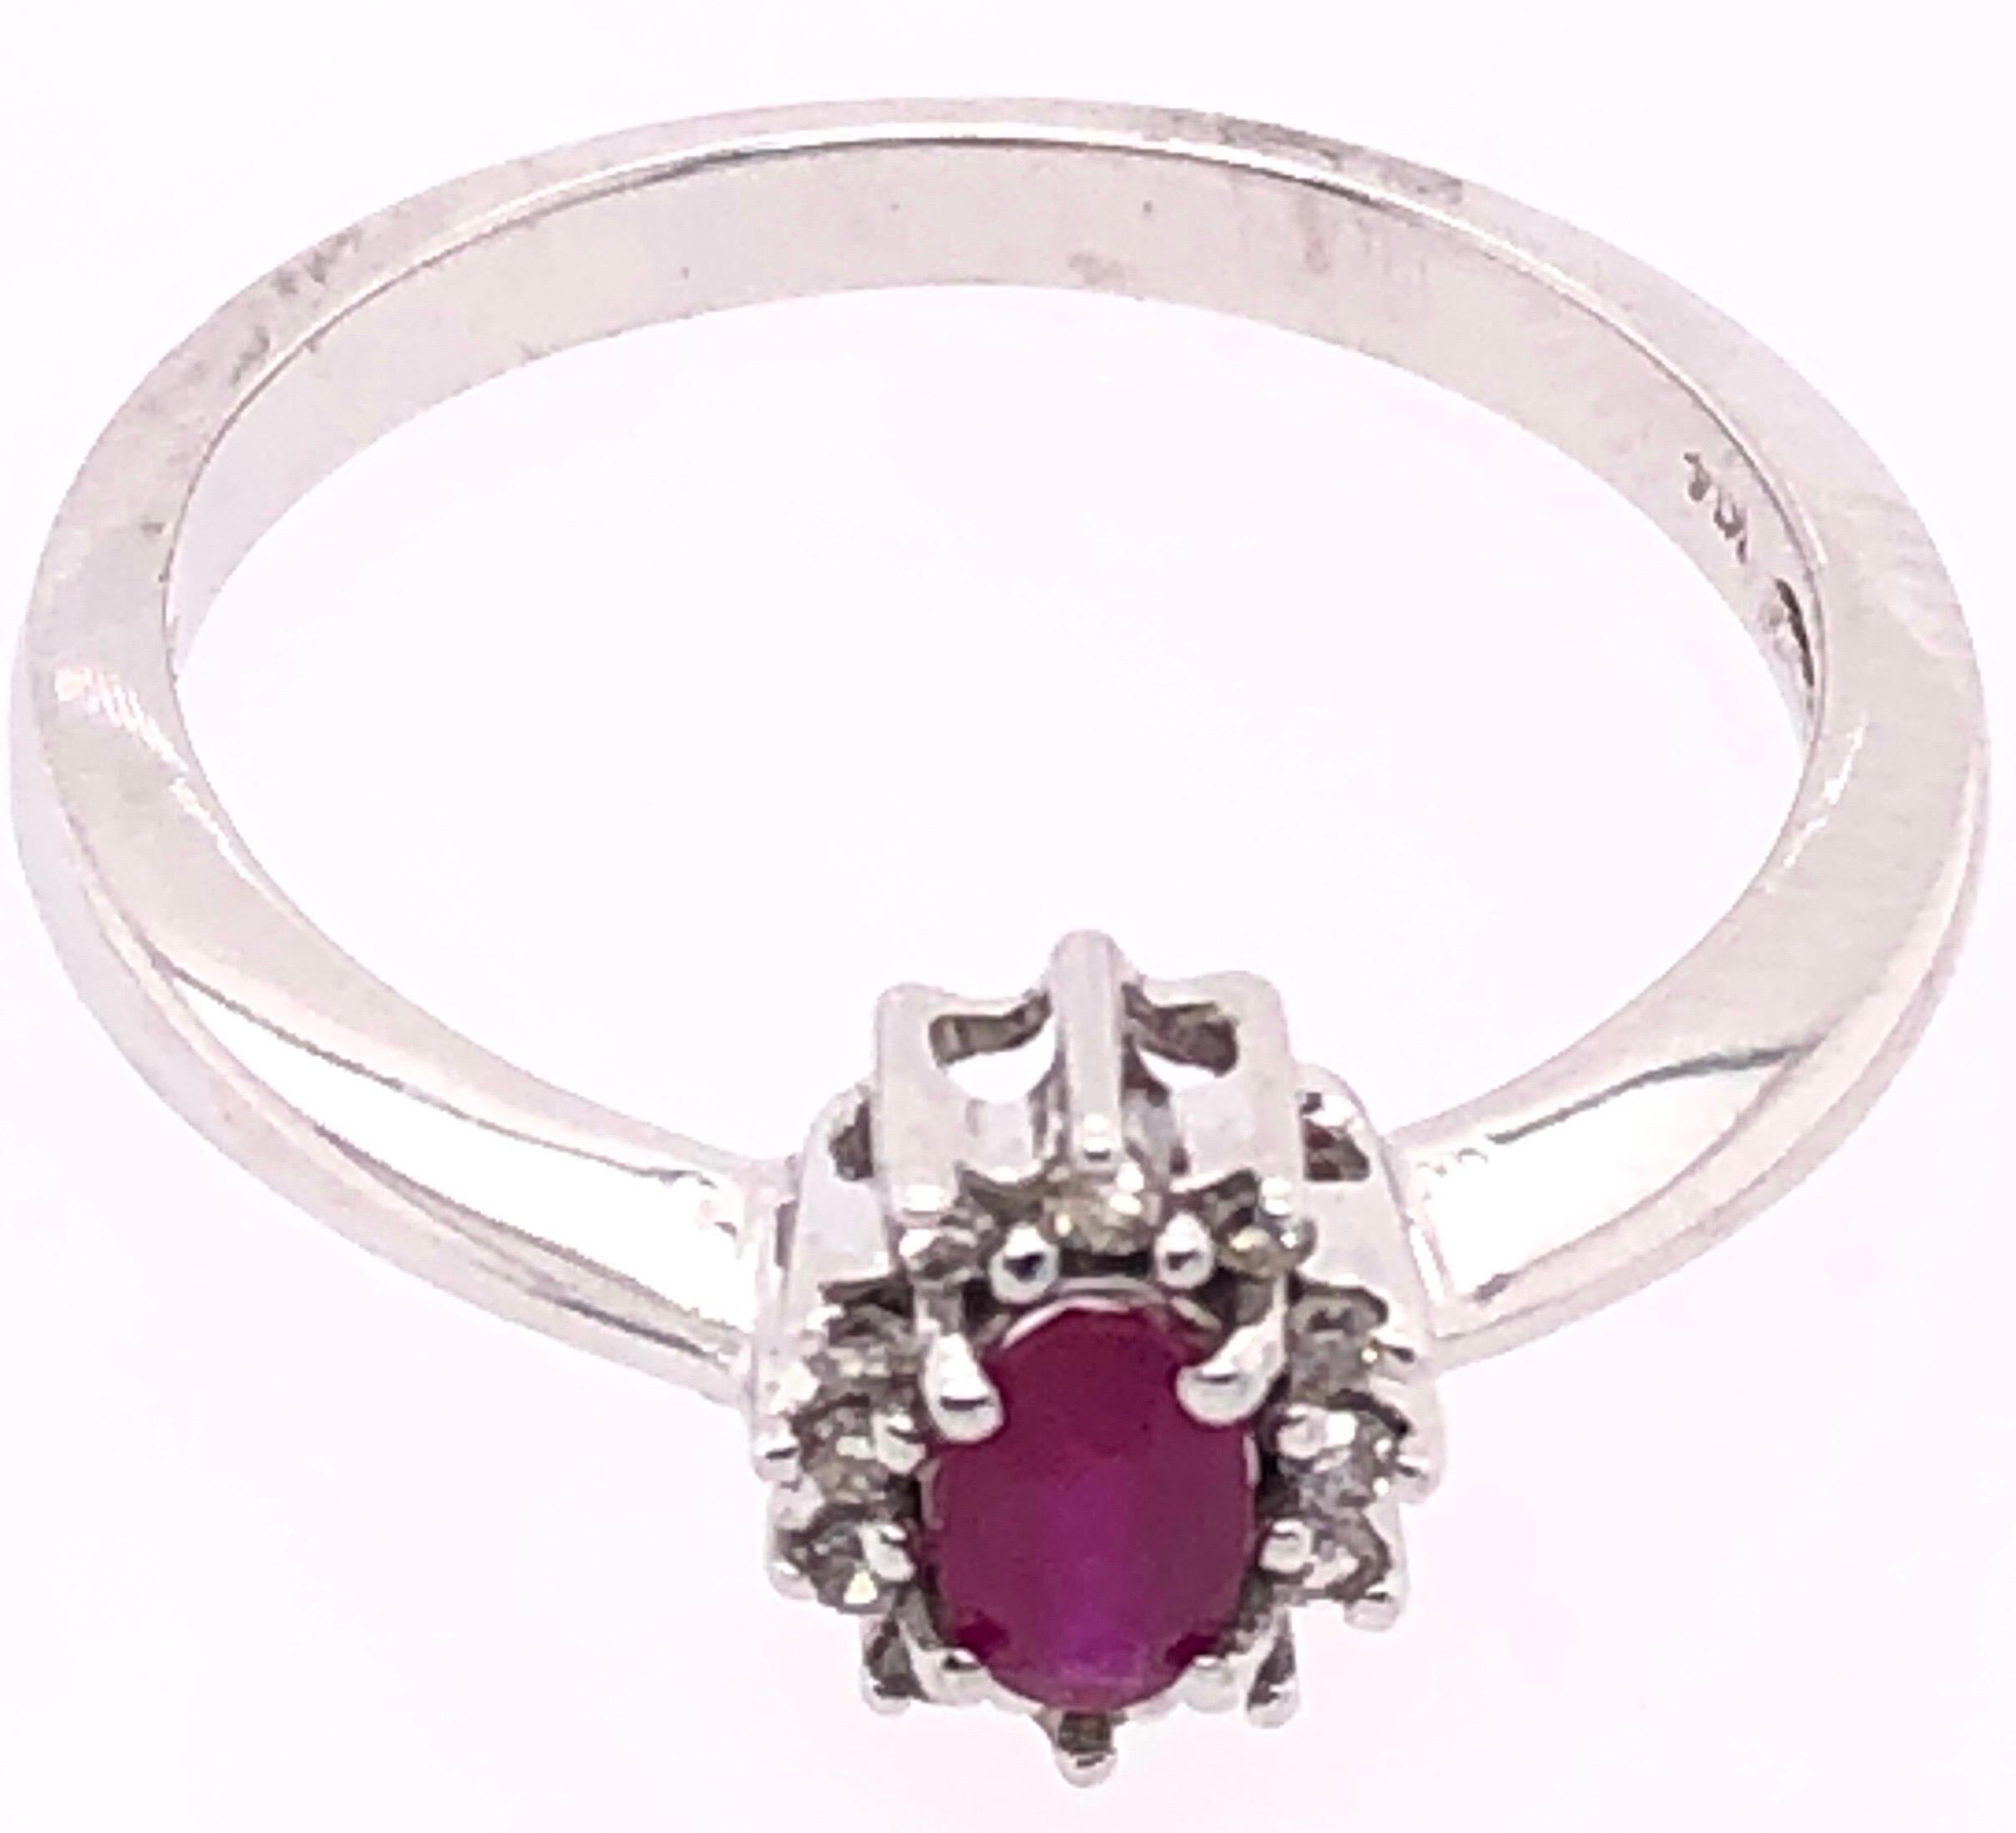 14 Karat White Gold Fashion Ruby Ring with Diamonds.
0.50 total diamond weight.
Size 6.5
2.92 grams total weight.